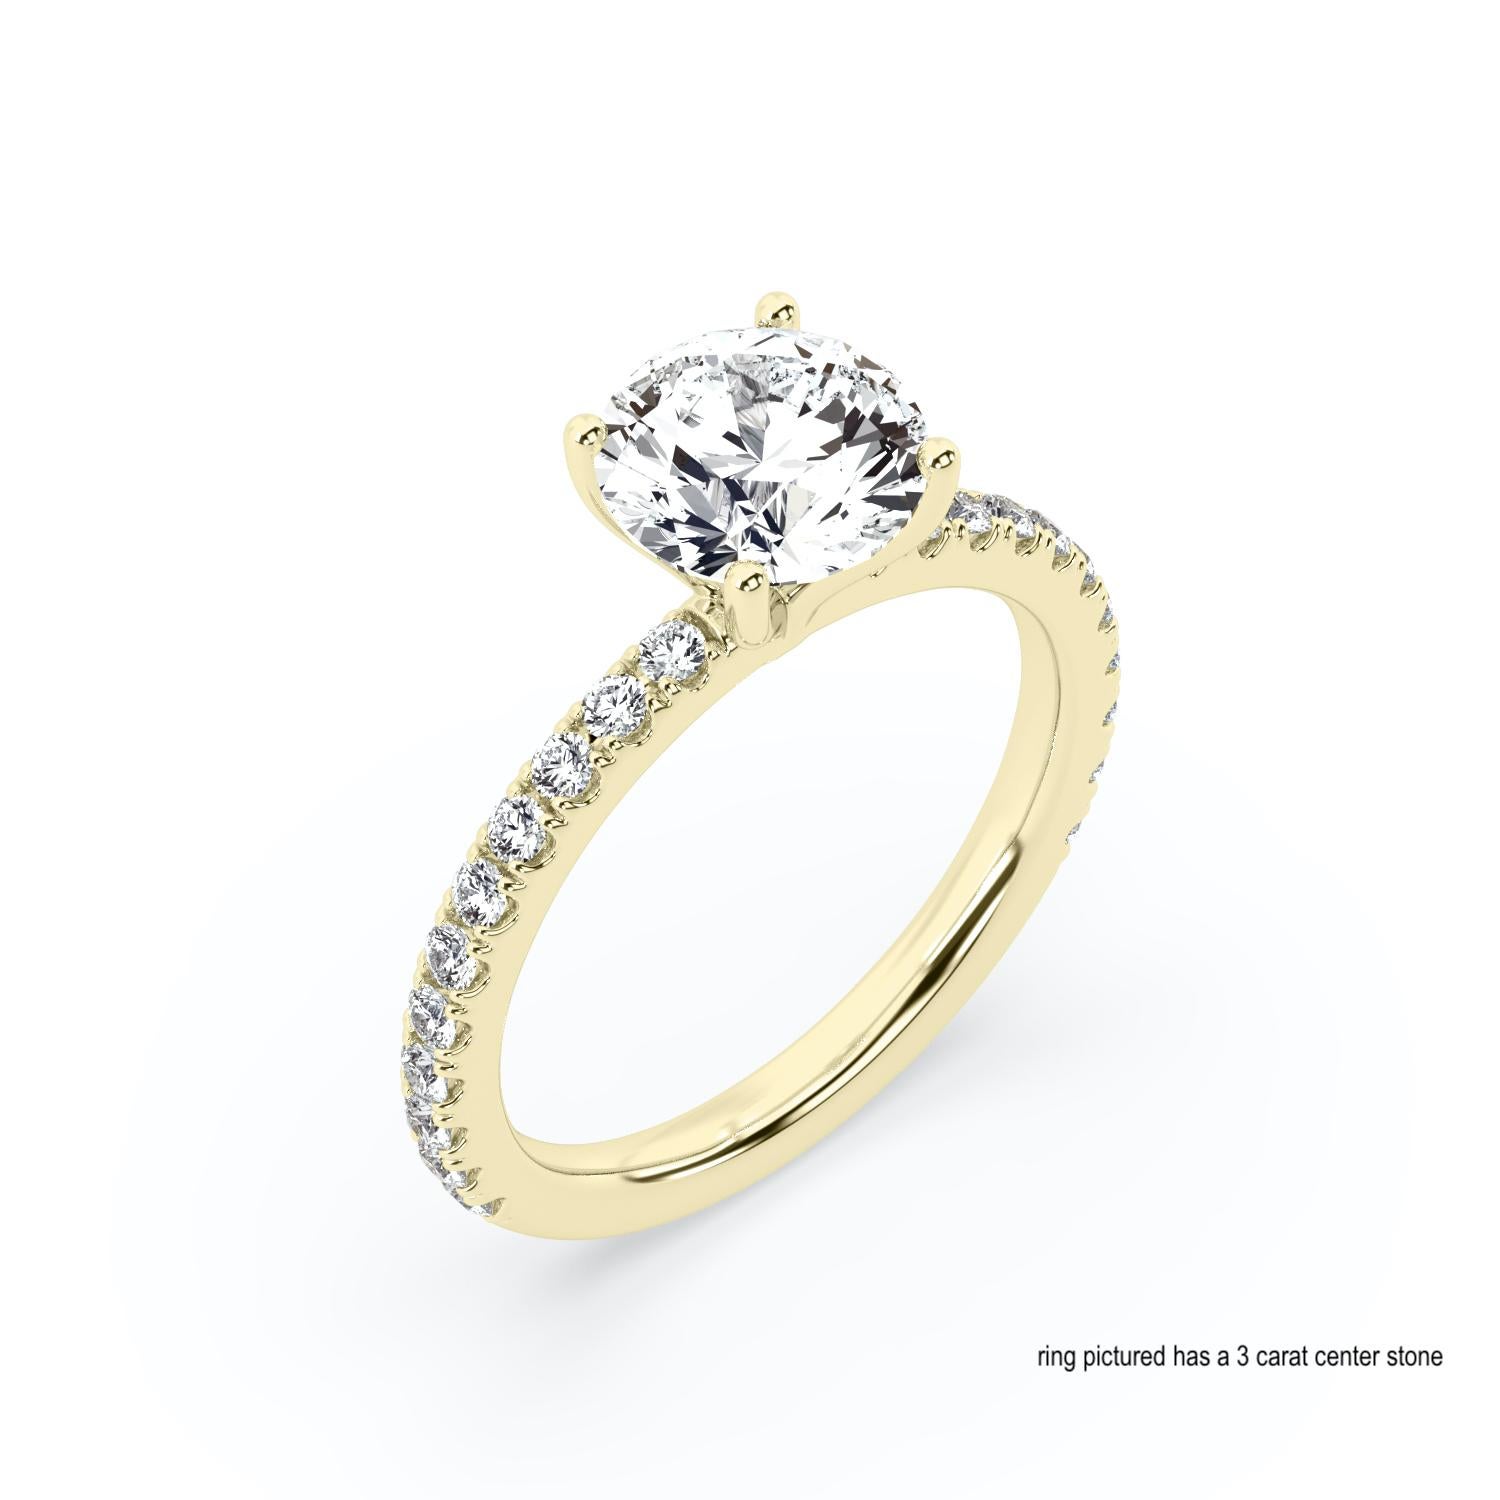 GIA certified 2 carat round briliant diamond engagement ring with G color and VS2 clarity (**this ring can be made with a different diamond to accommodate your budget and taste, please contact for more details). Diamond is set in a timeless delicate